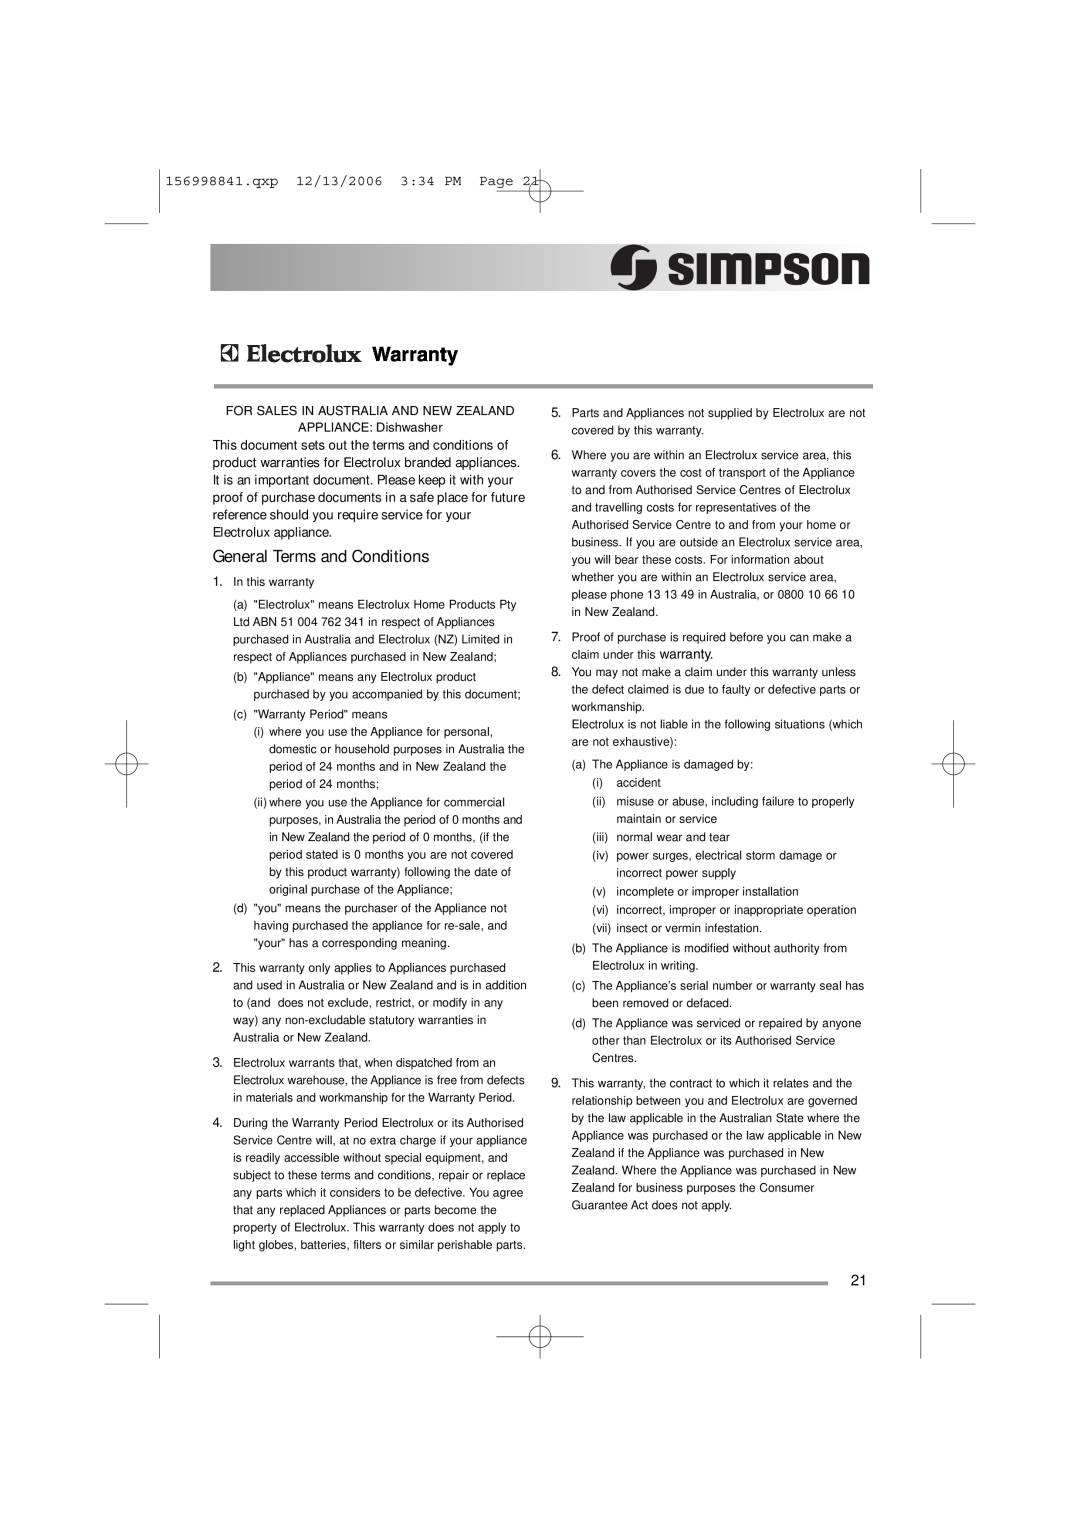 Simpson 52C850 user manual General Terms and Conditions, Warranty 